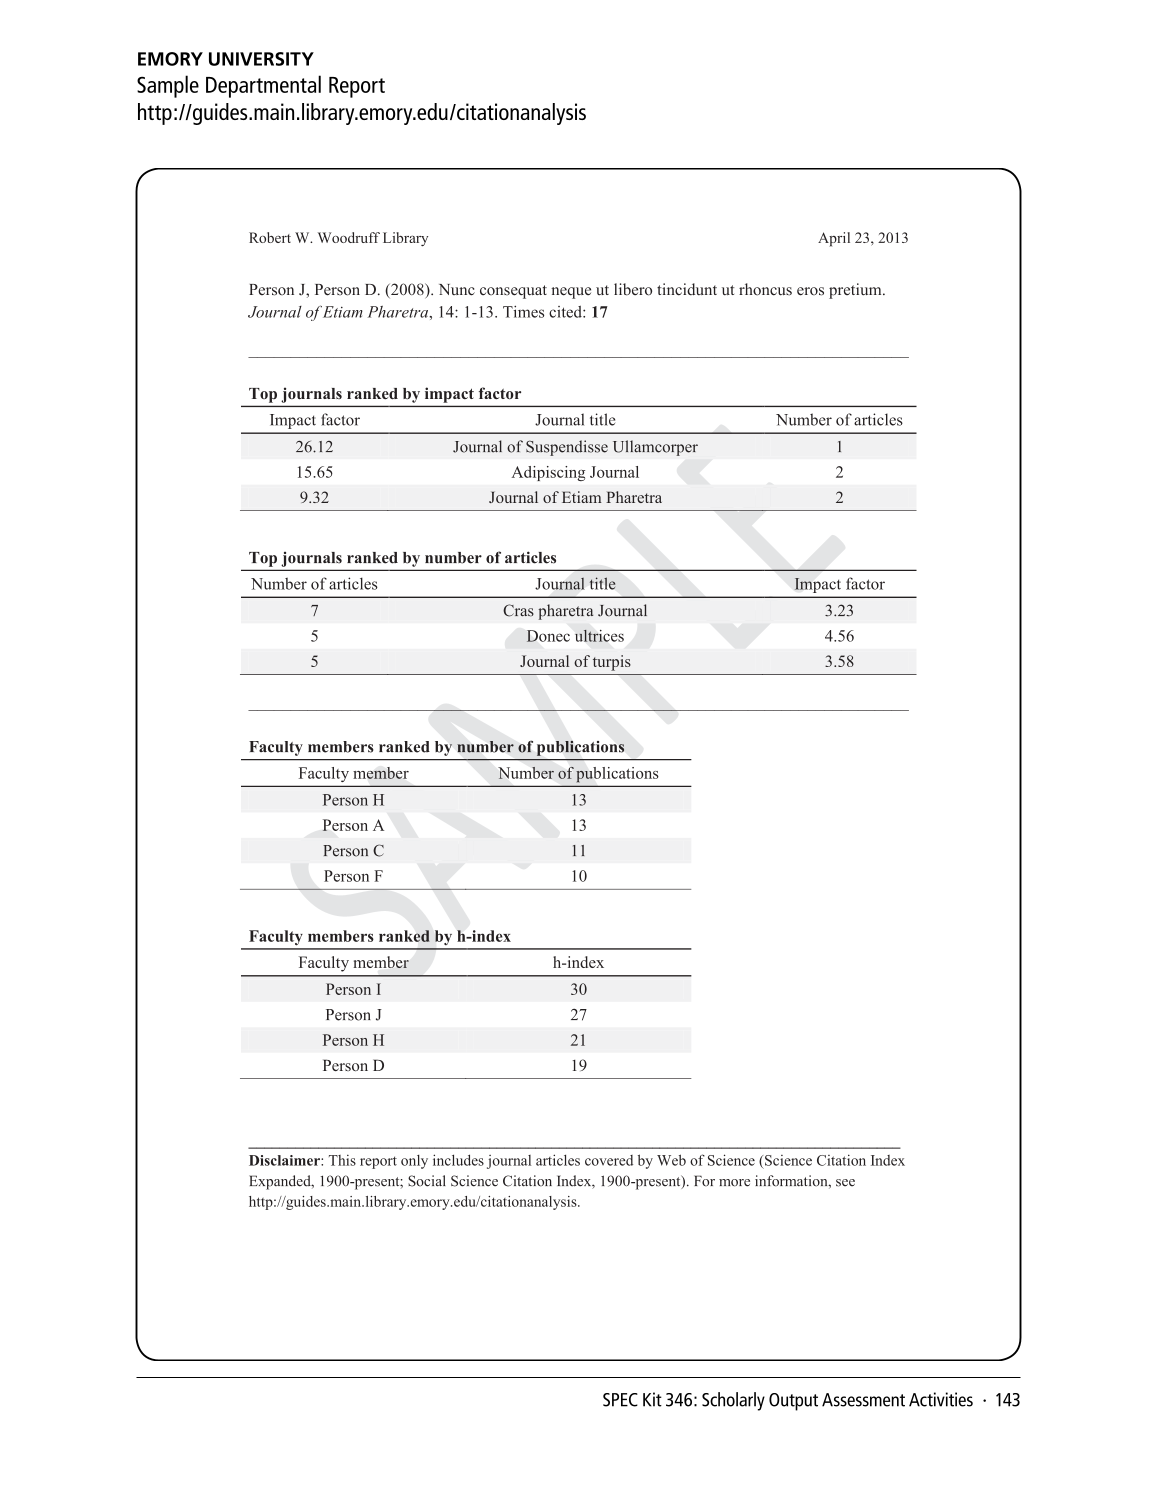 SPEC Kit 346: Scholarly Output Assessment Activities (May 2015) page 143